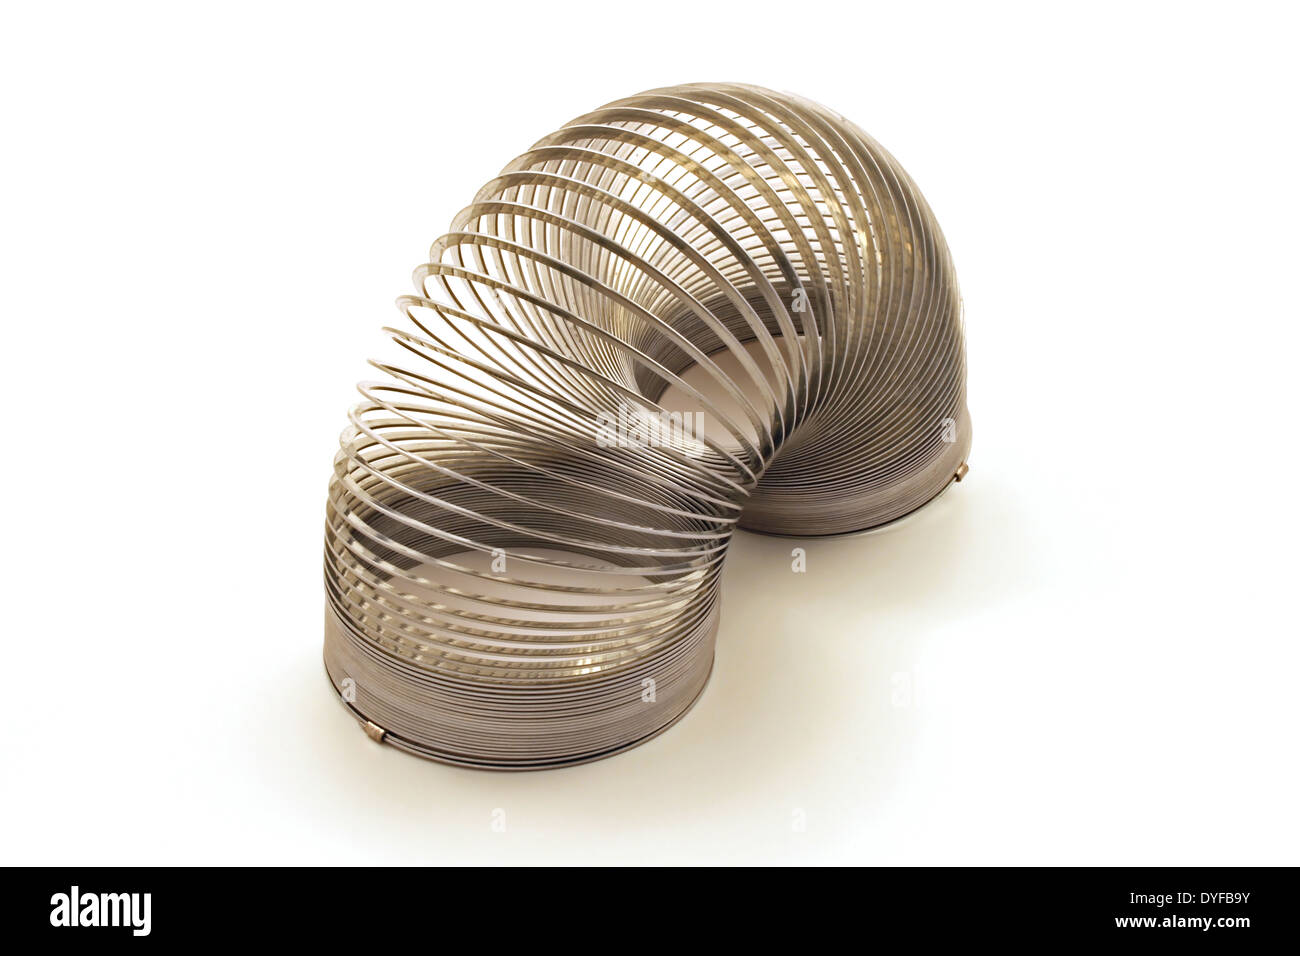 A silver spring coil toy against a white background Stock Photo